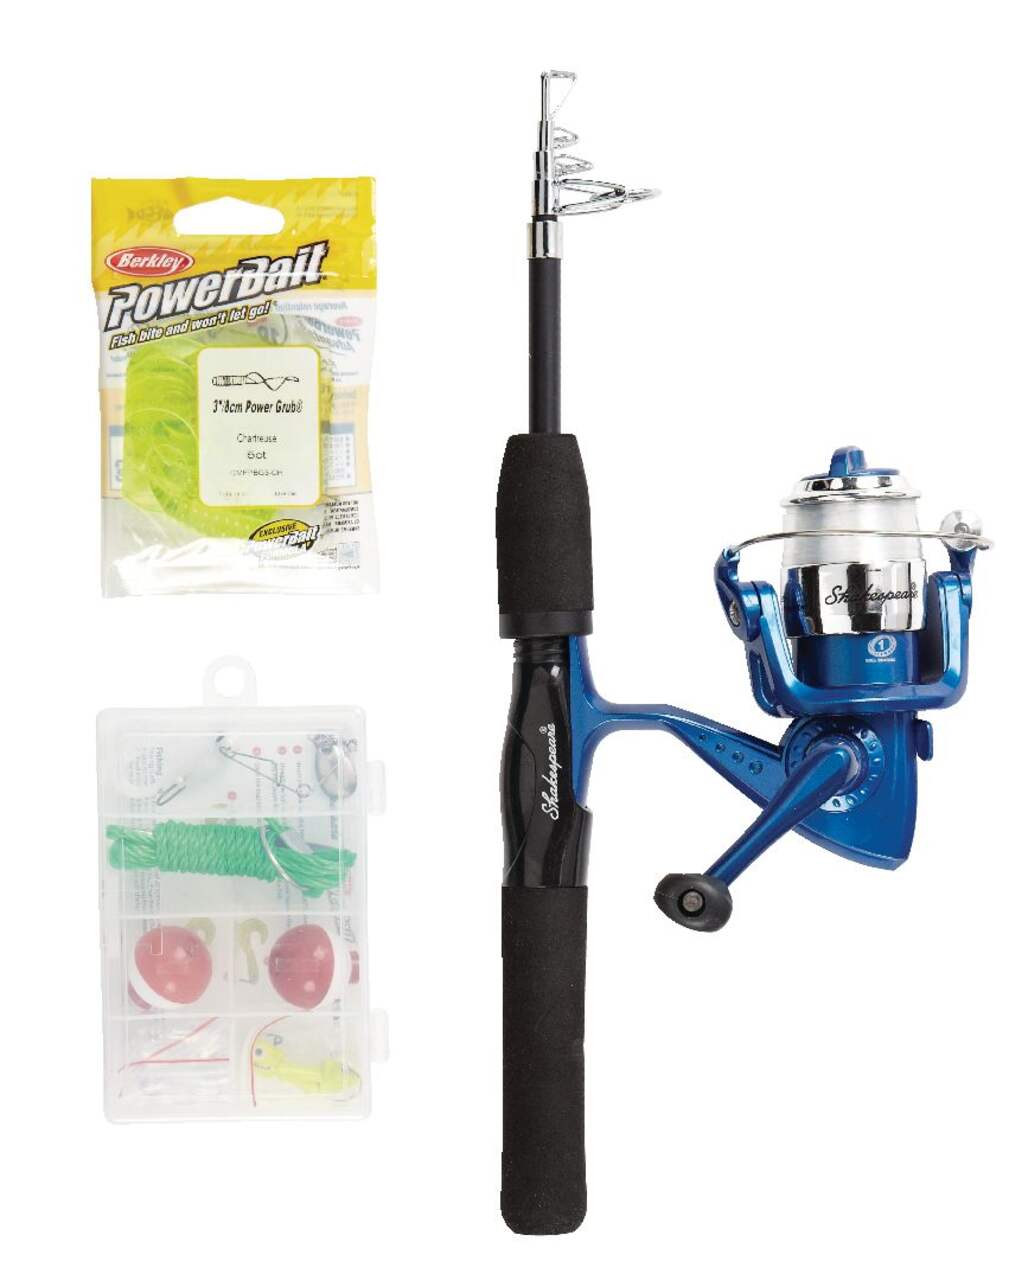 Fishing Rod And Reel Combo . Shipping Available for Sale in Upr